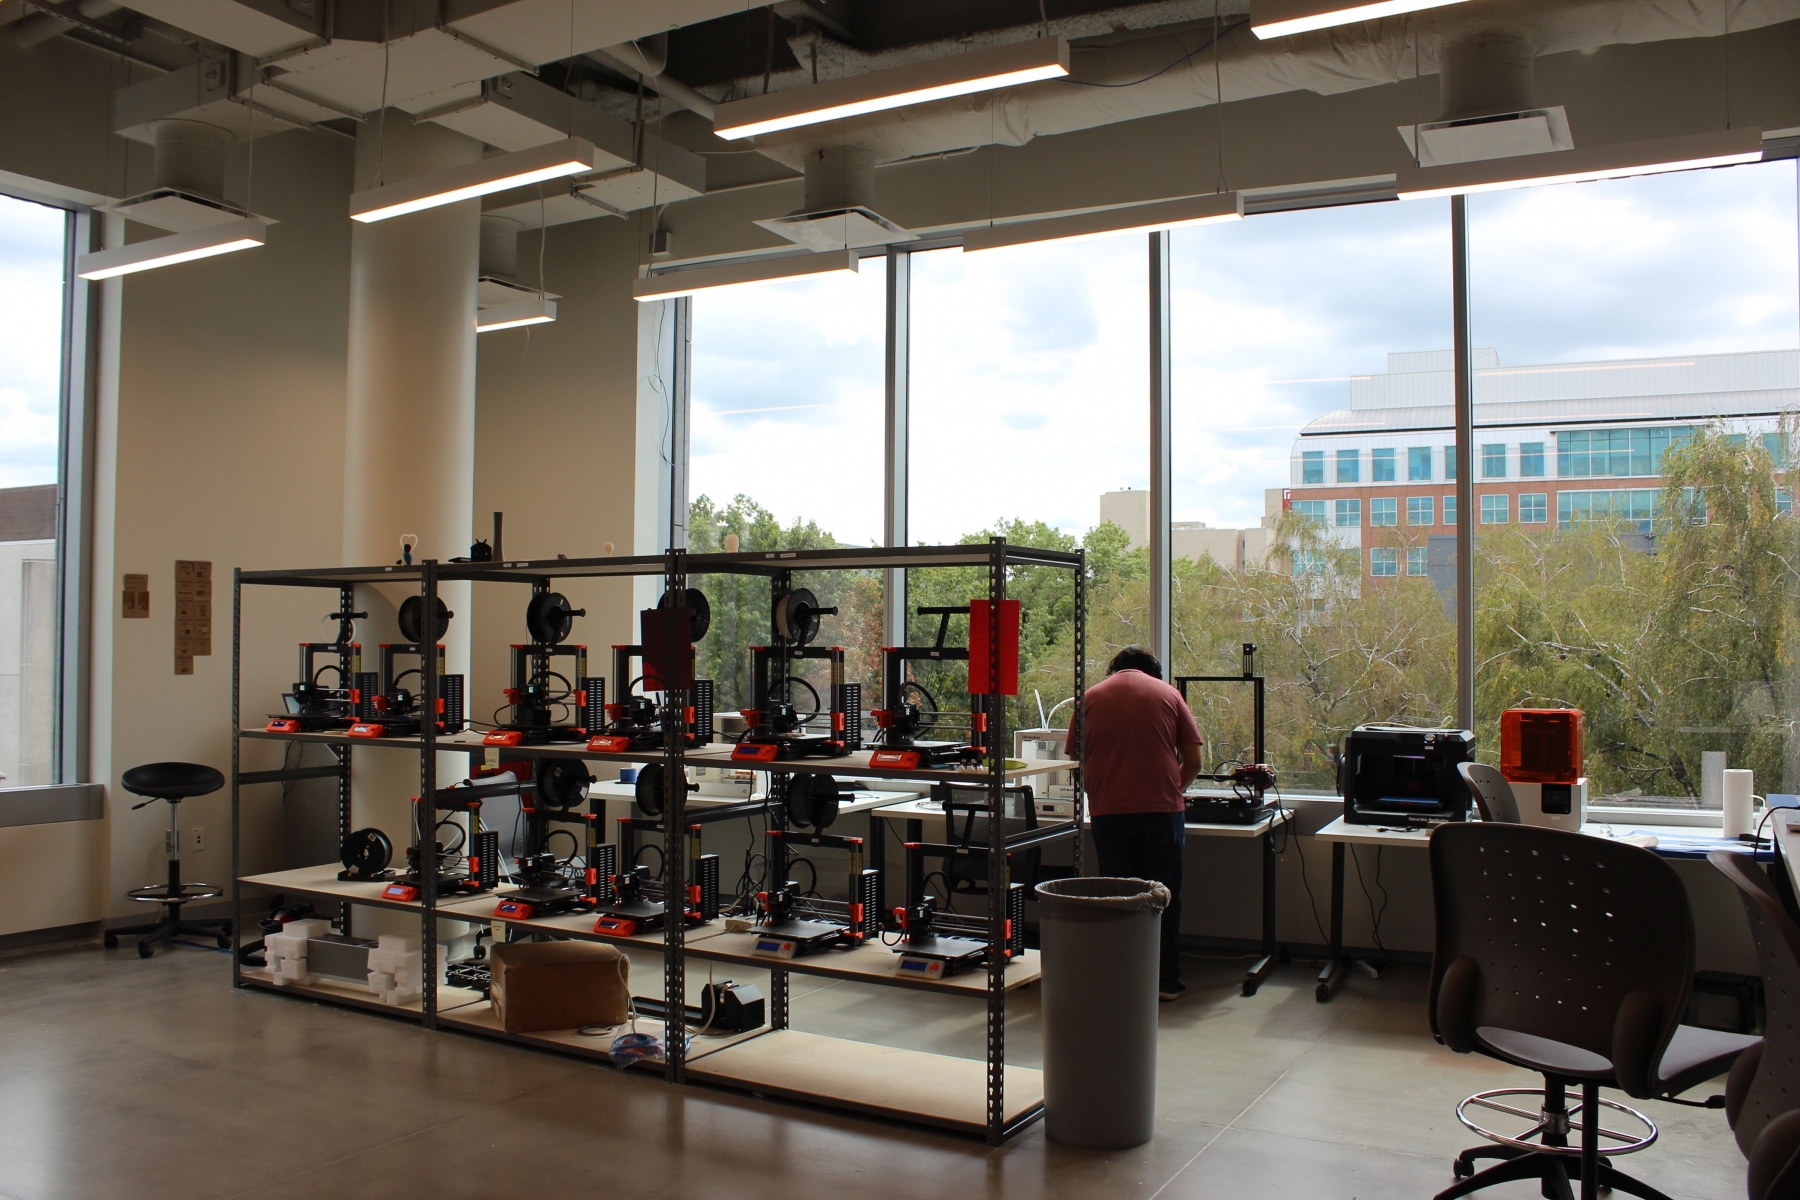 Makerspace at Temple University